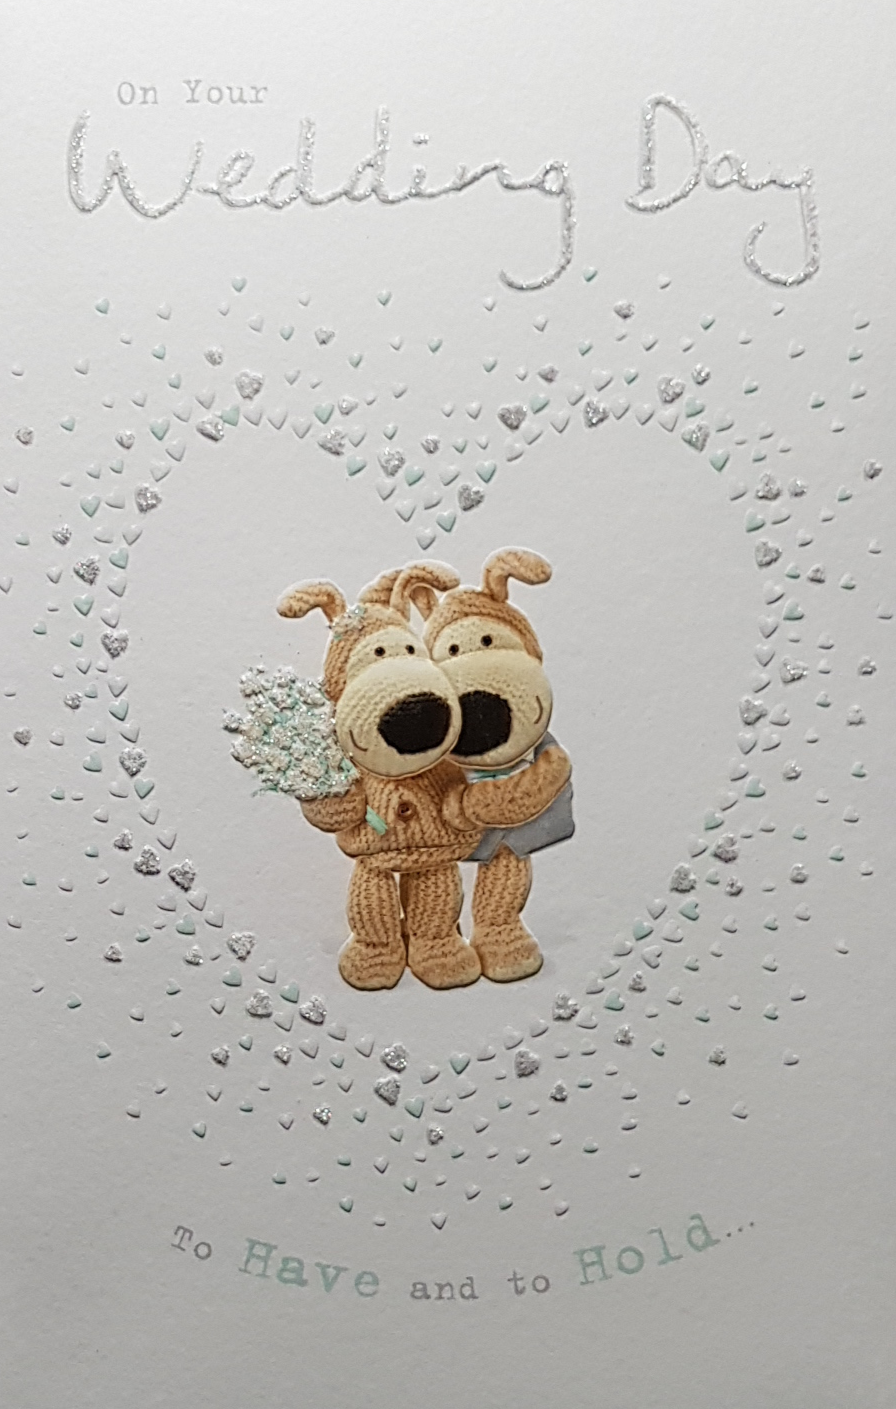 Wedding Card - Cute Dog Teddies Surrounded by Little White Hearts